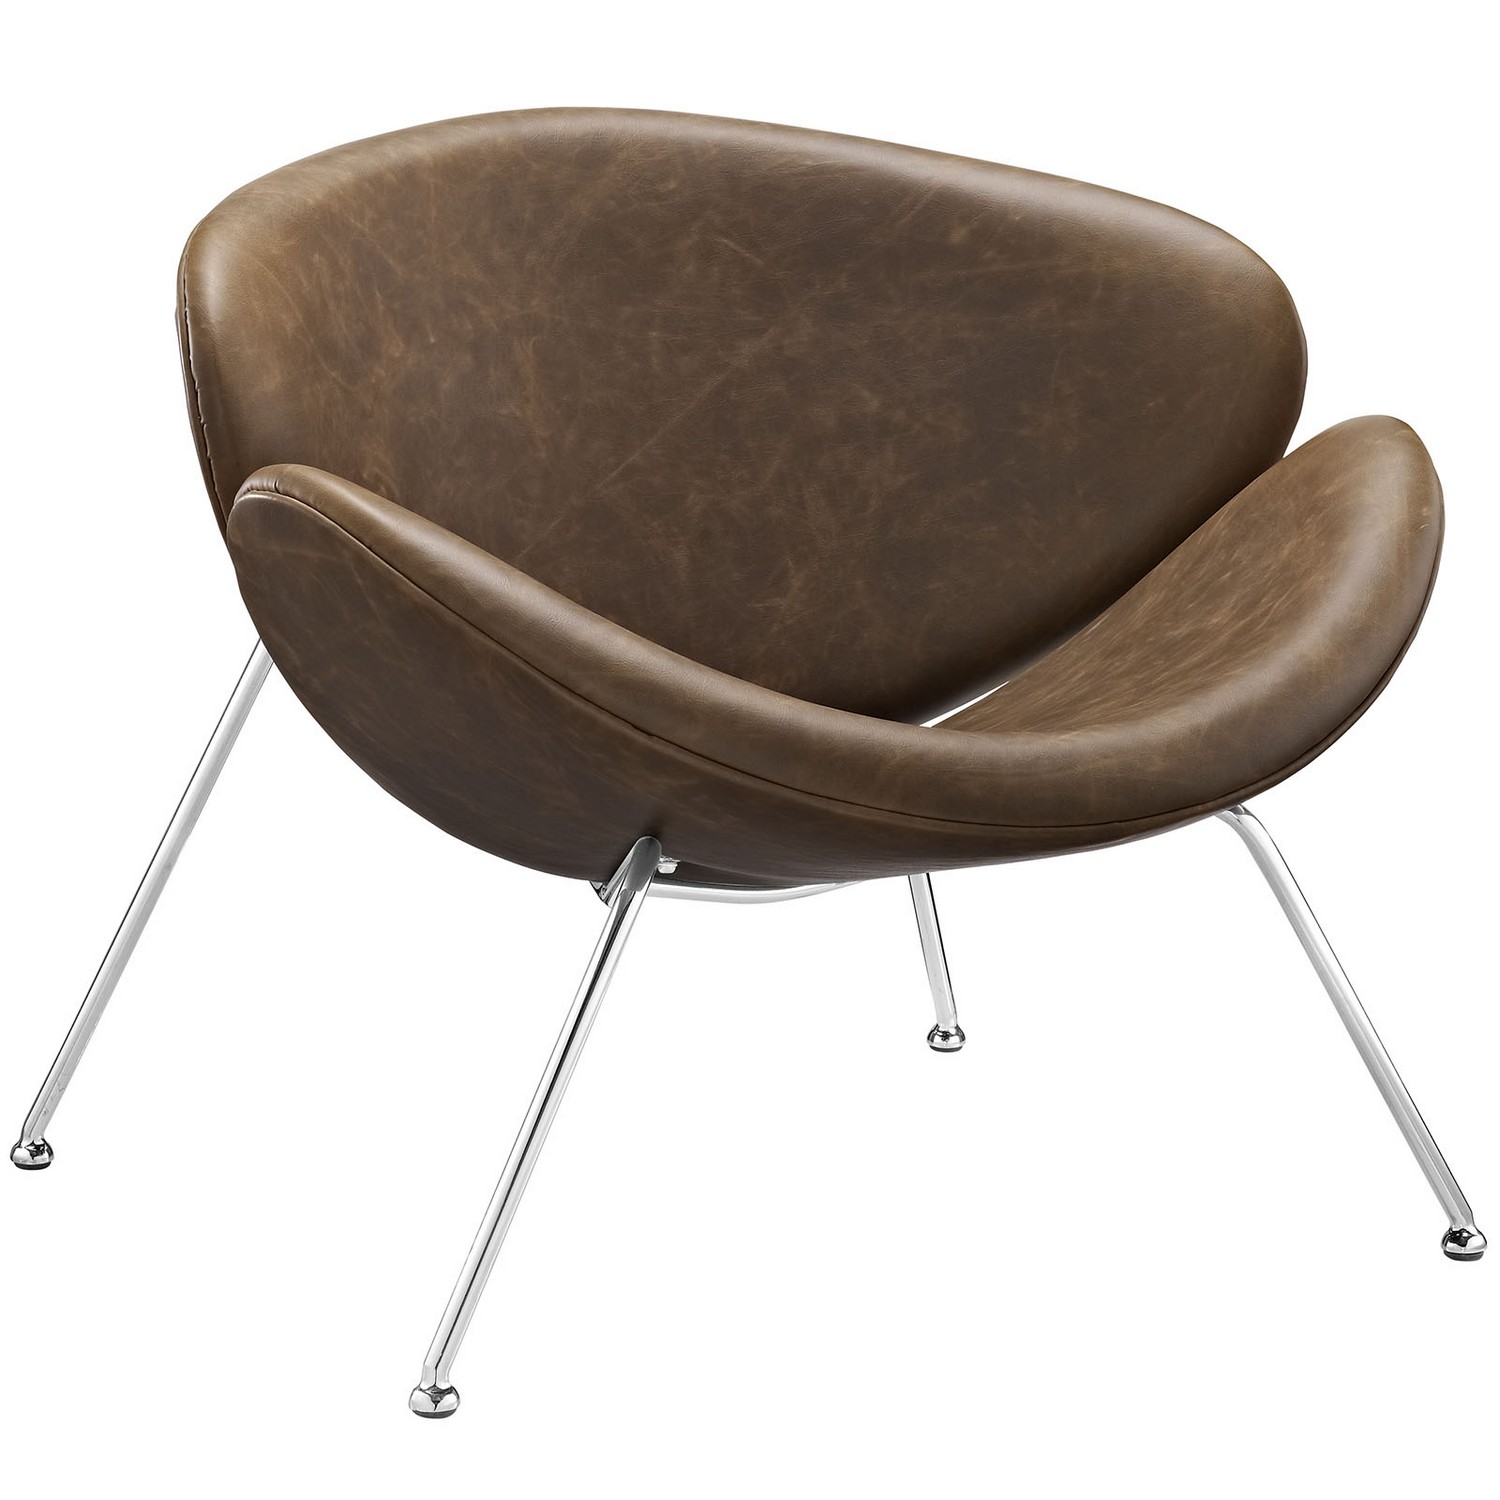 Modway Nutshell Lounge Chair - Brown